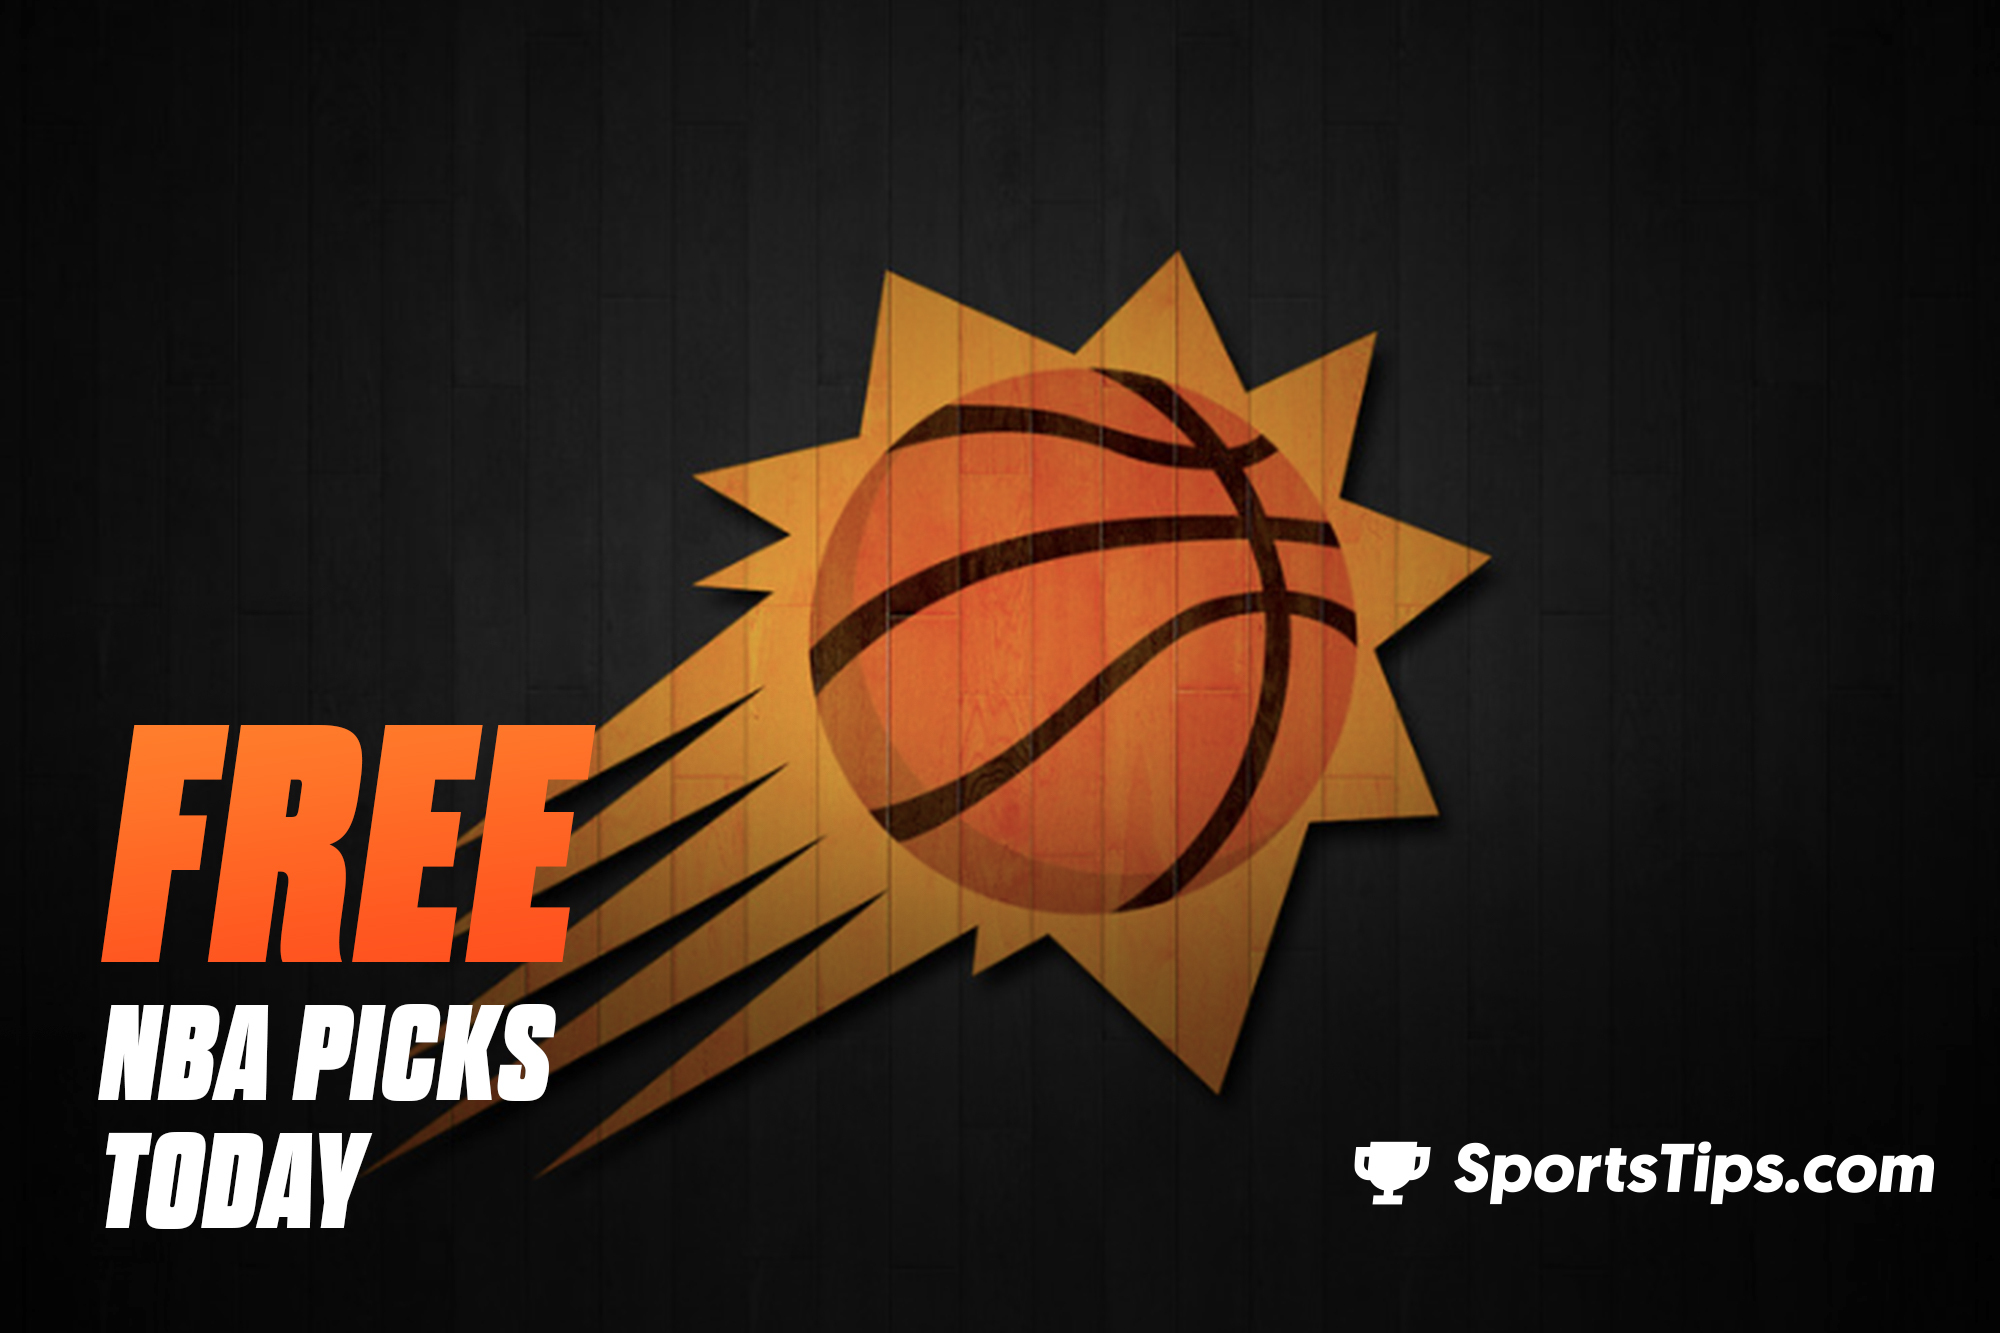 Free NBA Picks Today for Monday, December 27th, 2021